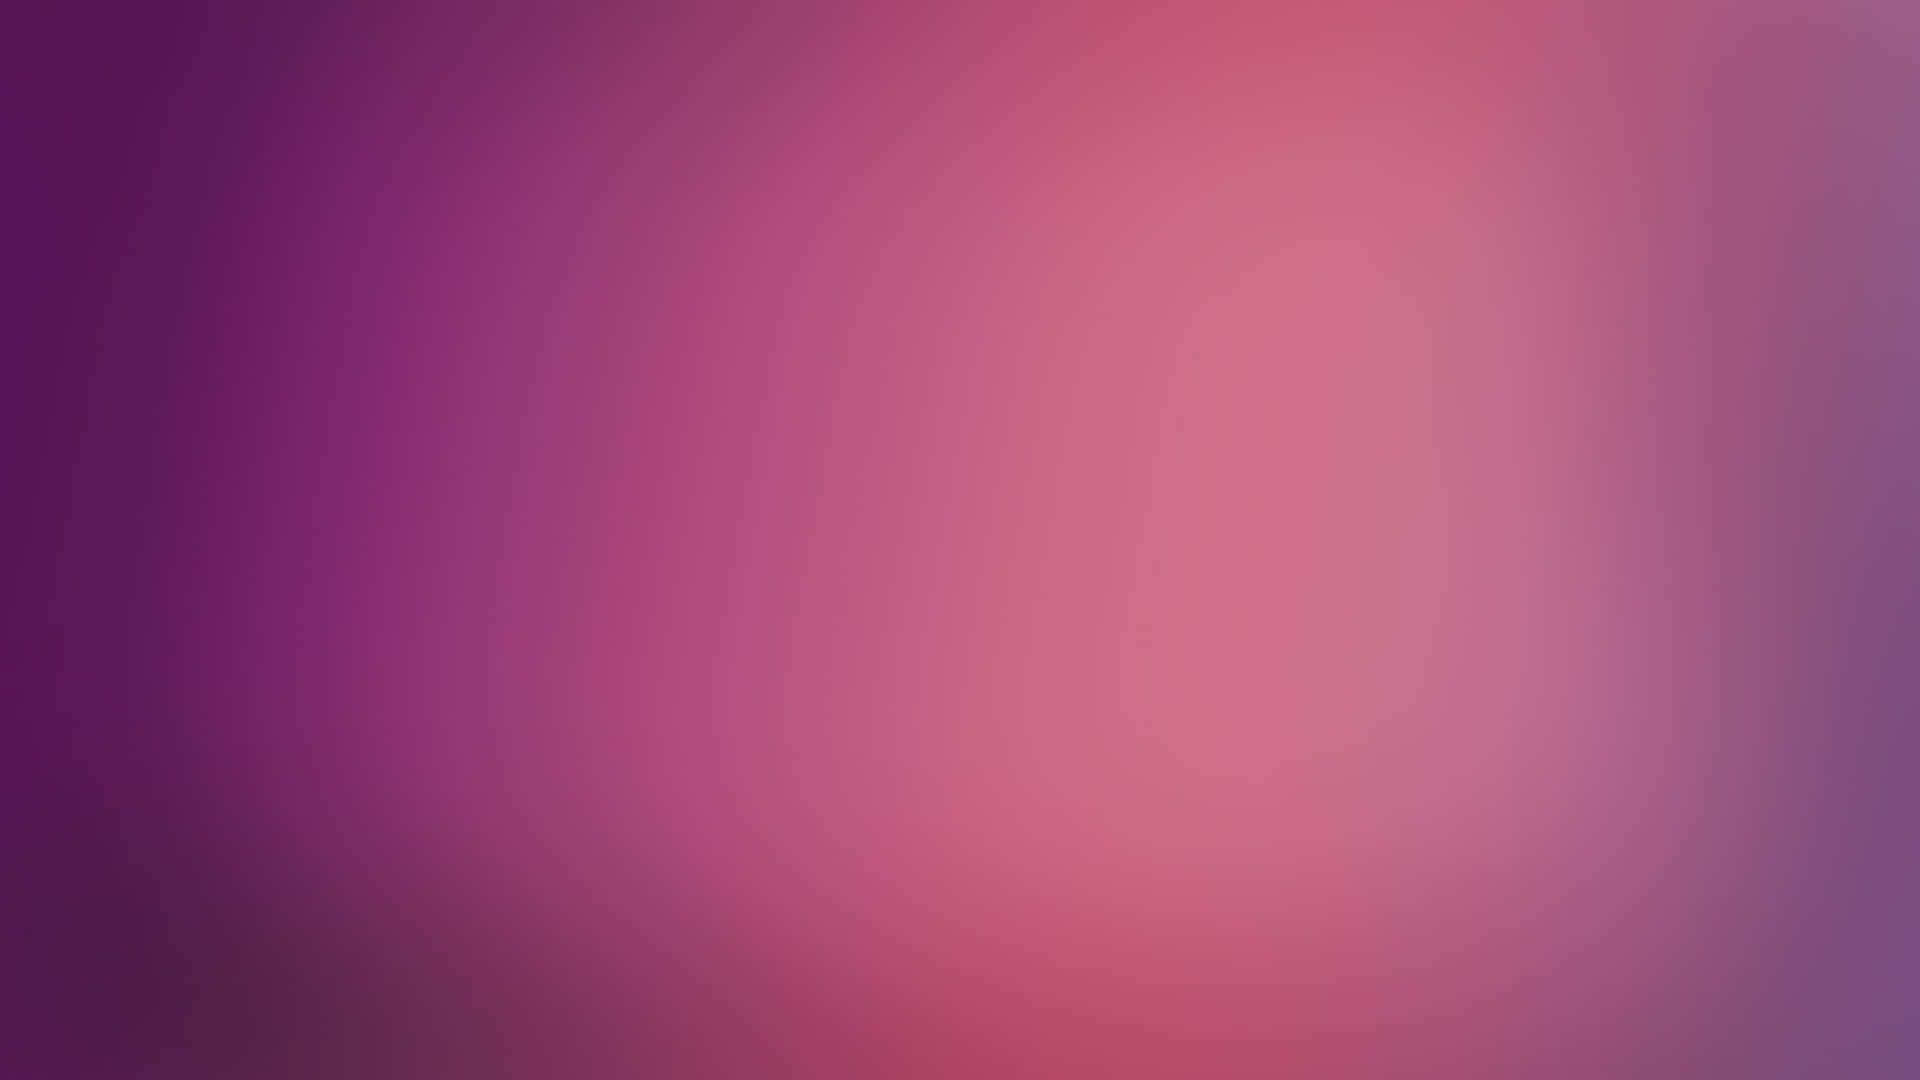 Solid Background Violet And Pink Gradient Wallpaper